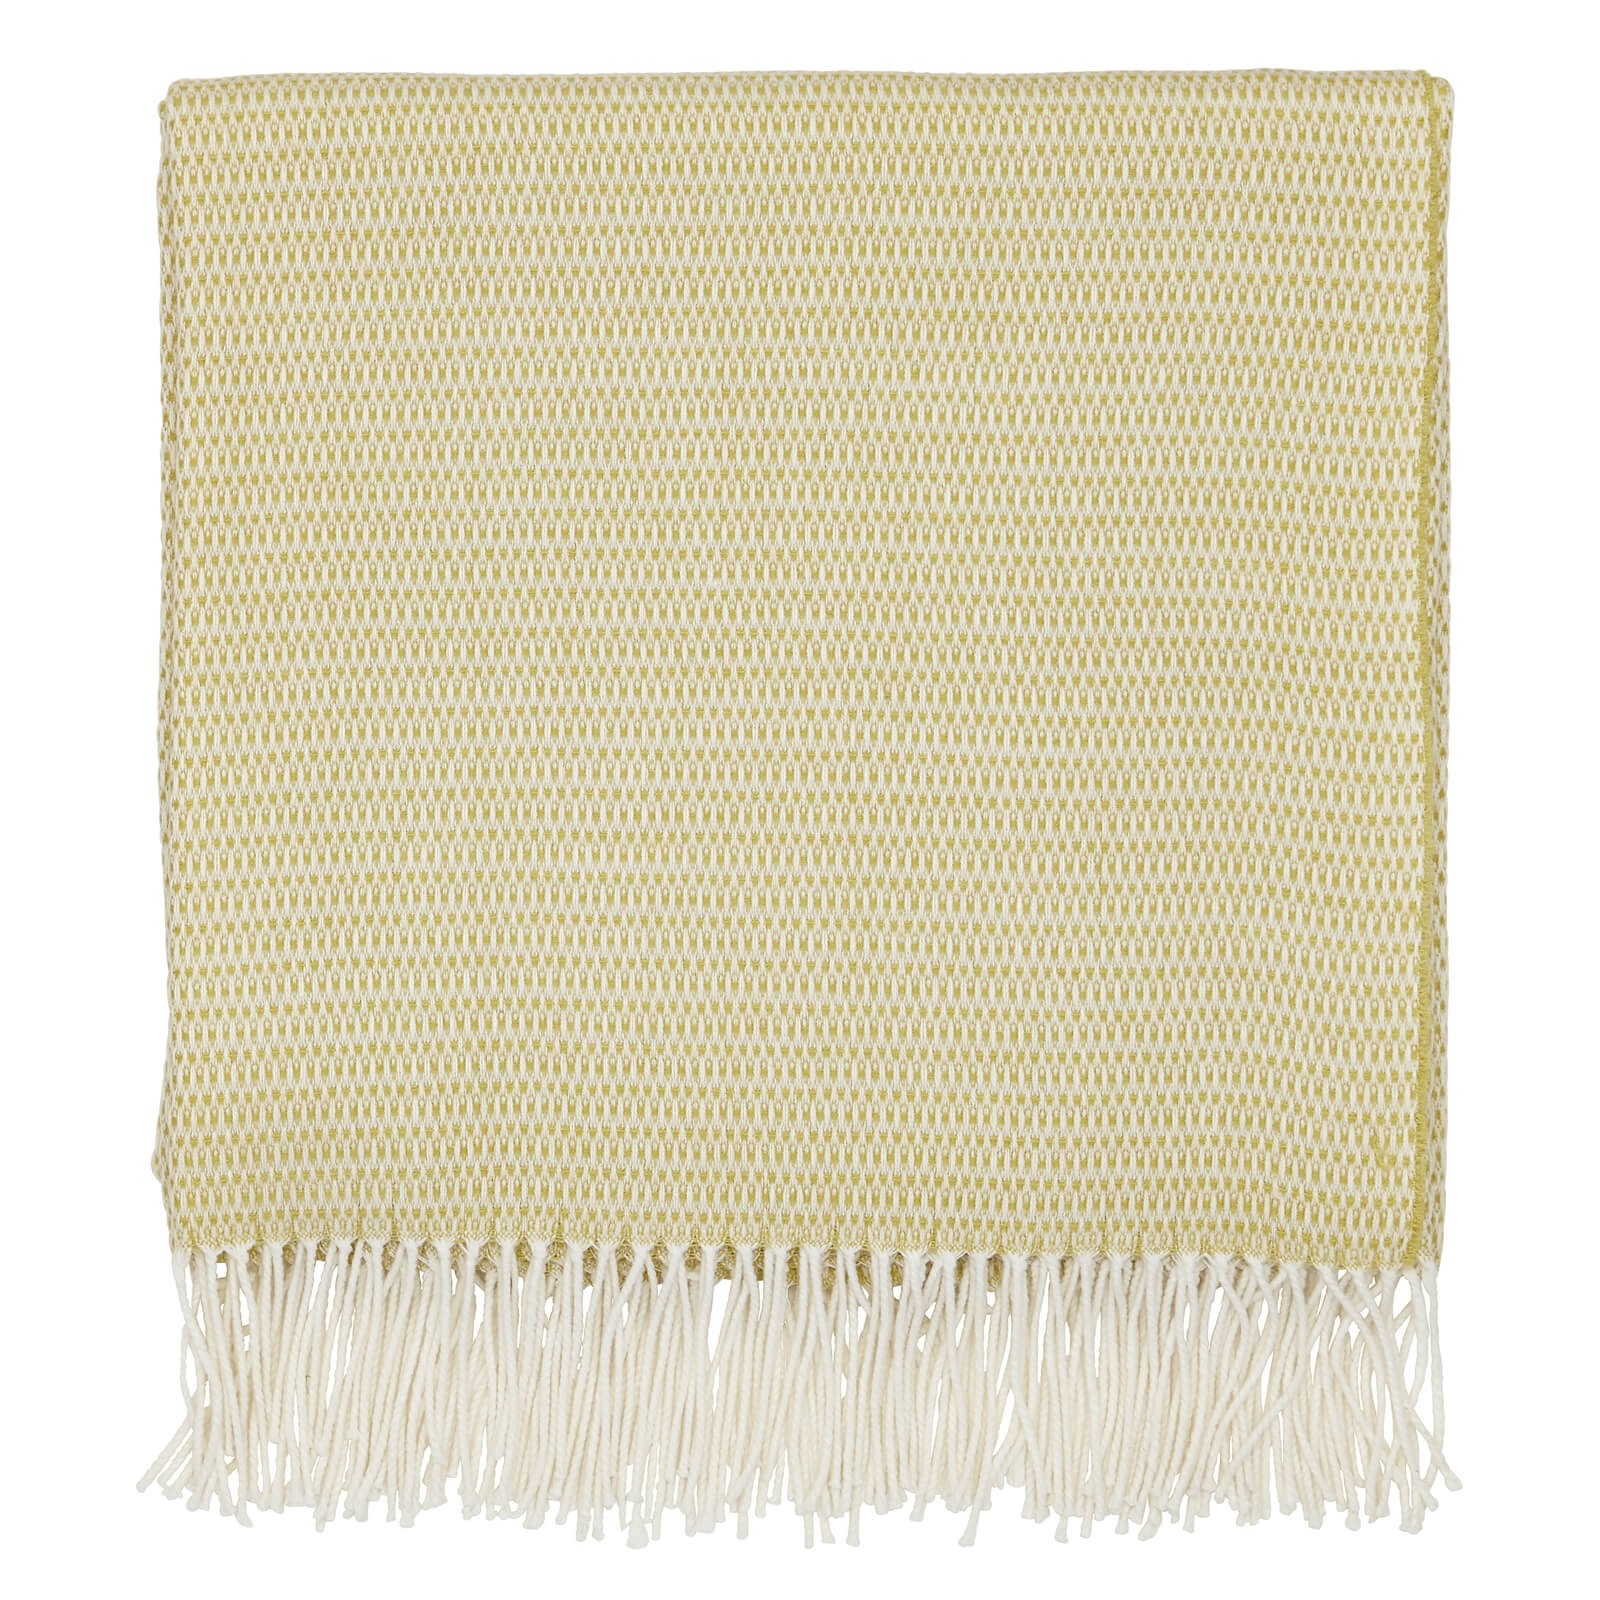 Sanderson Home Coraline Woven Throw 130x170cm - Chartreuse